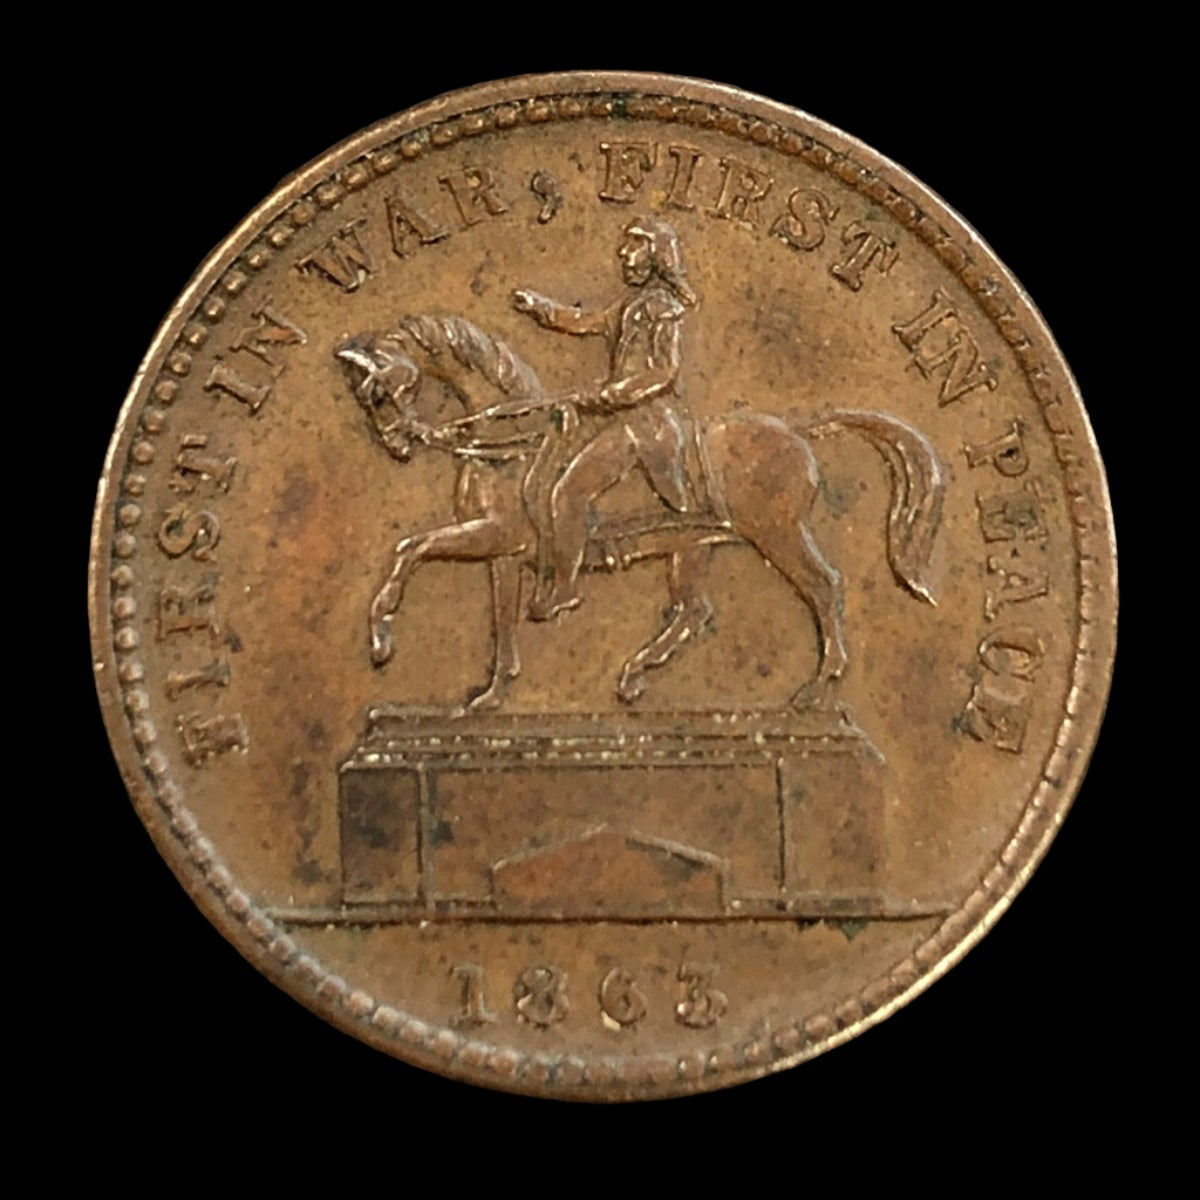 1863 Civil War Token “First in War, First in Peace / Union For Ever”